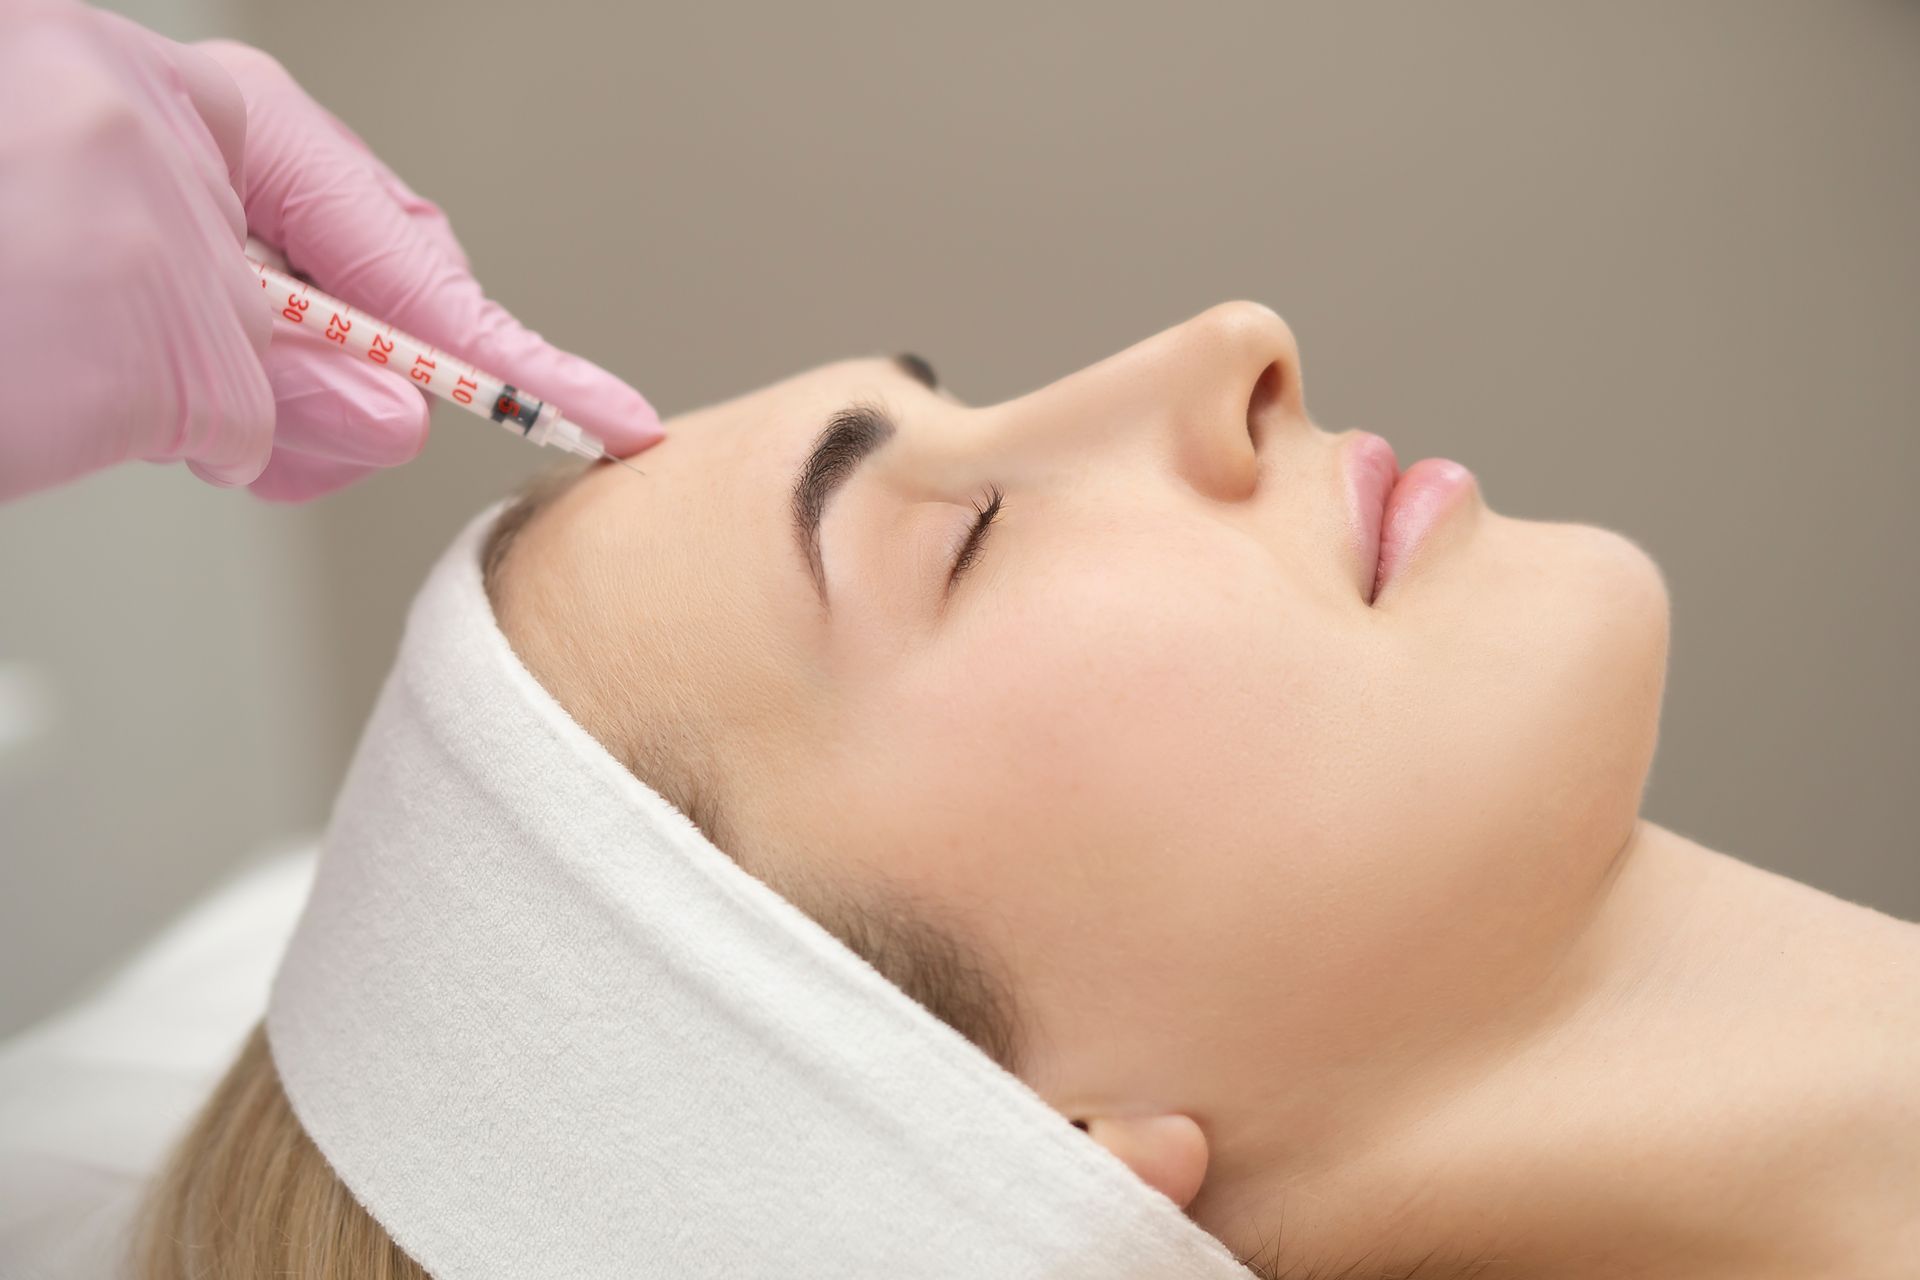 A woman is getting a botox injection in her forehead.